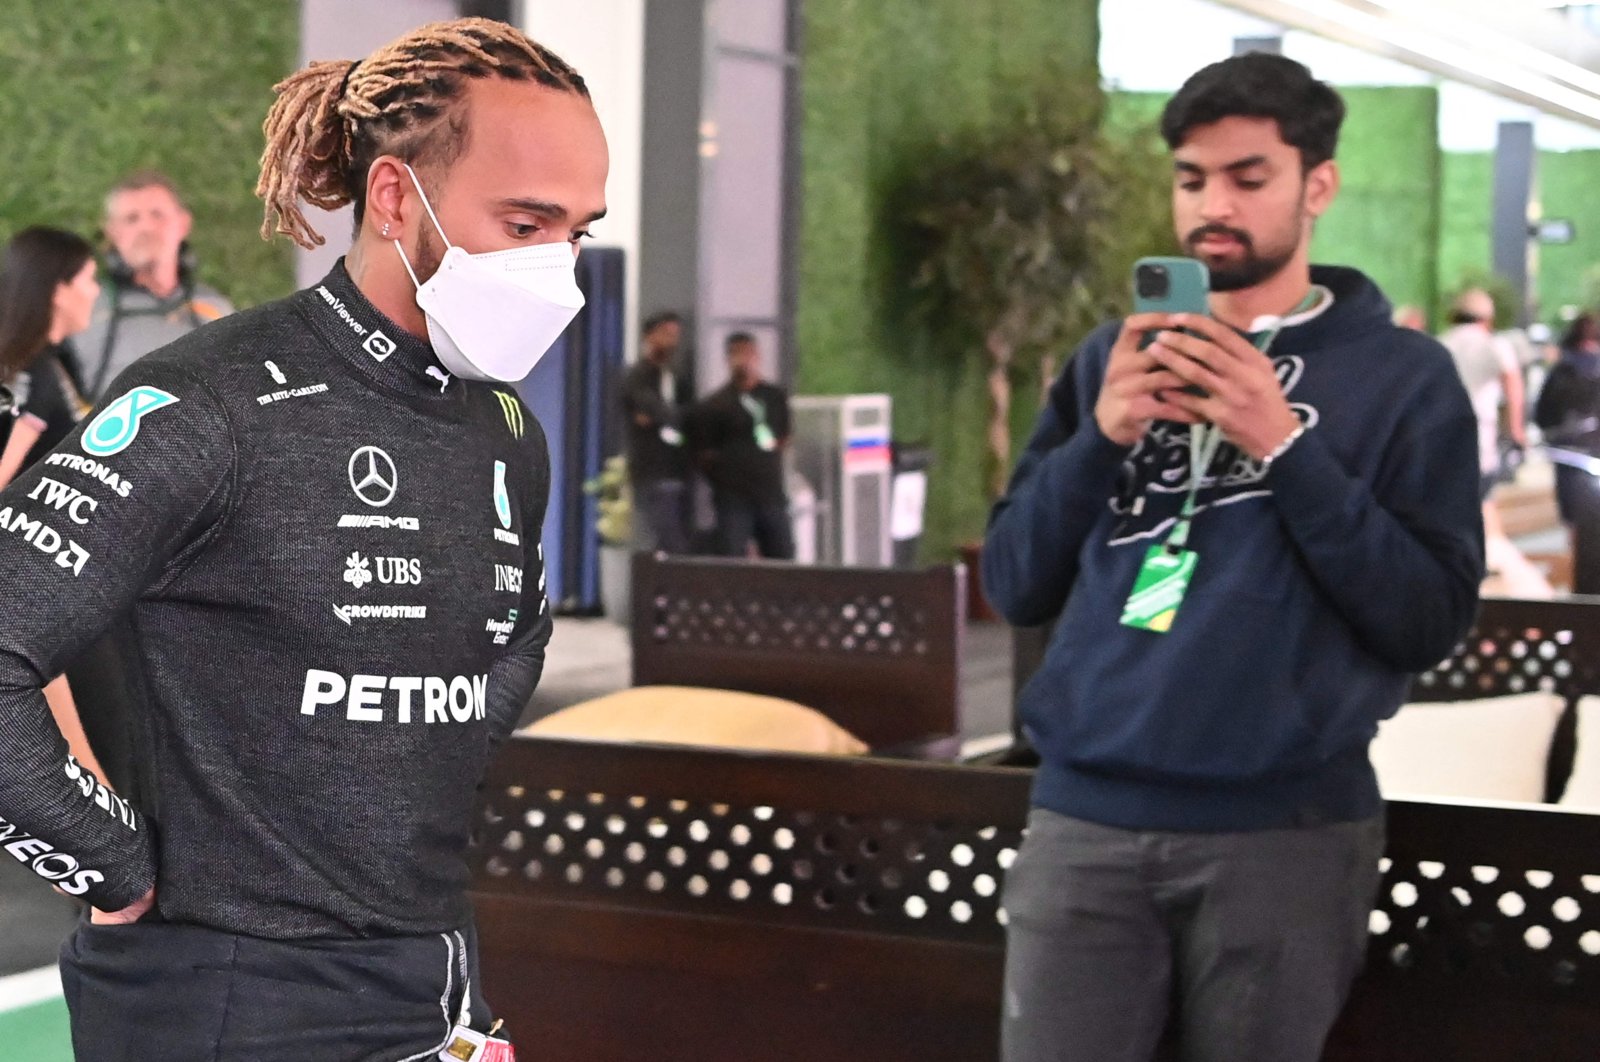 Mercedes&#039; Lewis Hamilton (L) leaves following a meeting with other F1 drivers and principals before a practice session ahead of the 2022 Saudi Arabia F1 GP, Jeddah, Saudi Arabia, March 25, 2022. (AFP Photo)